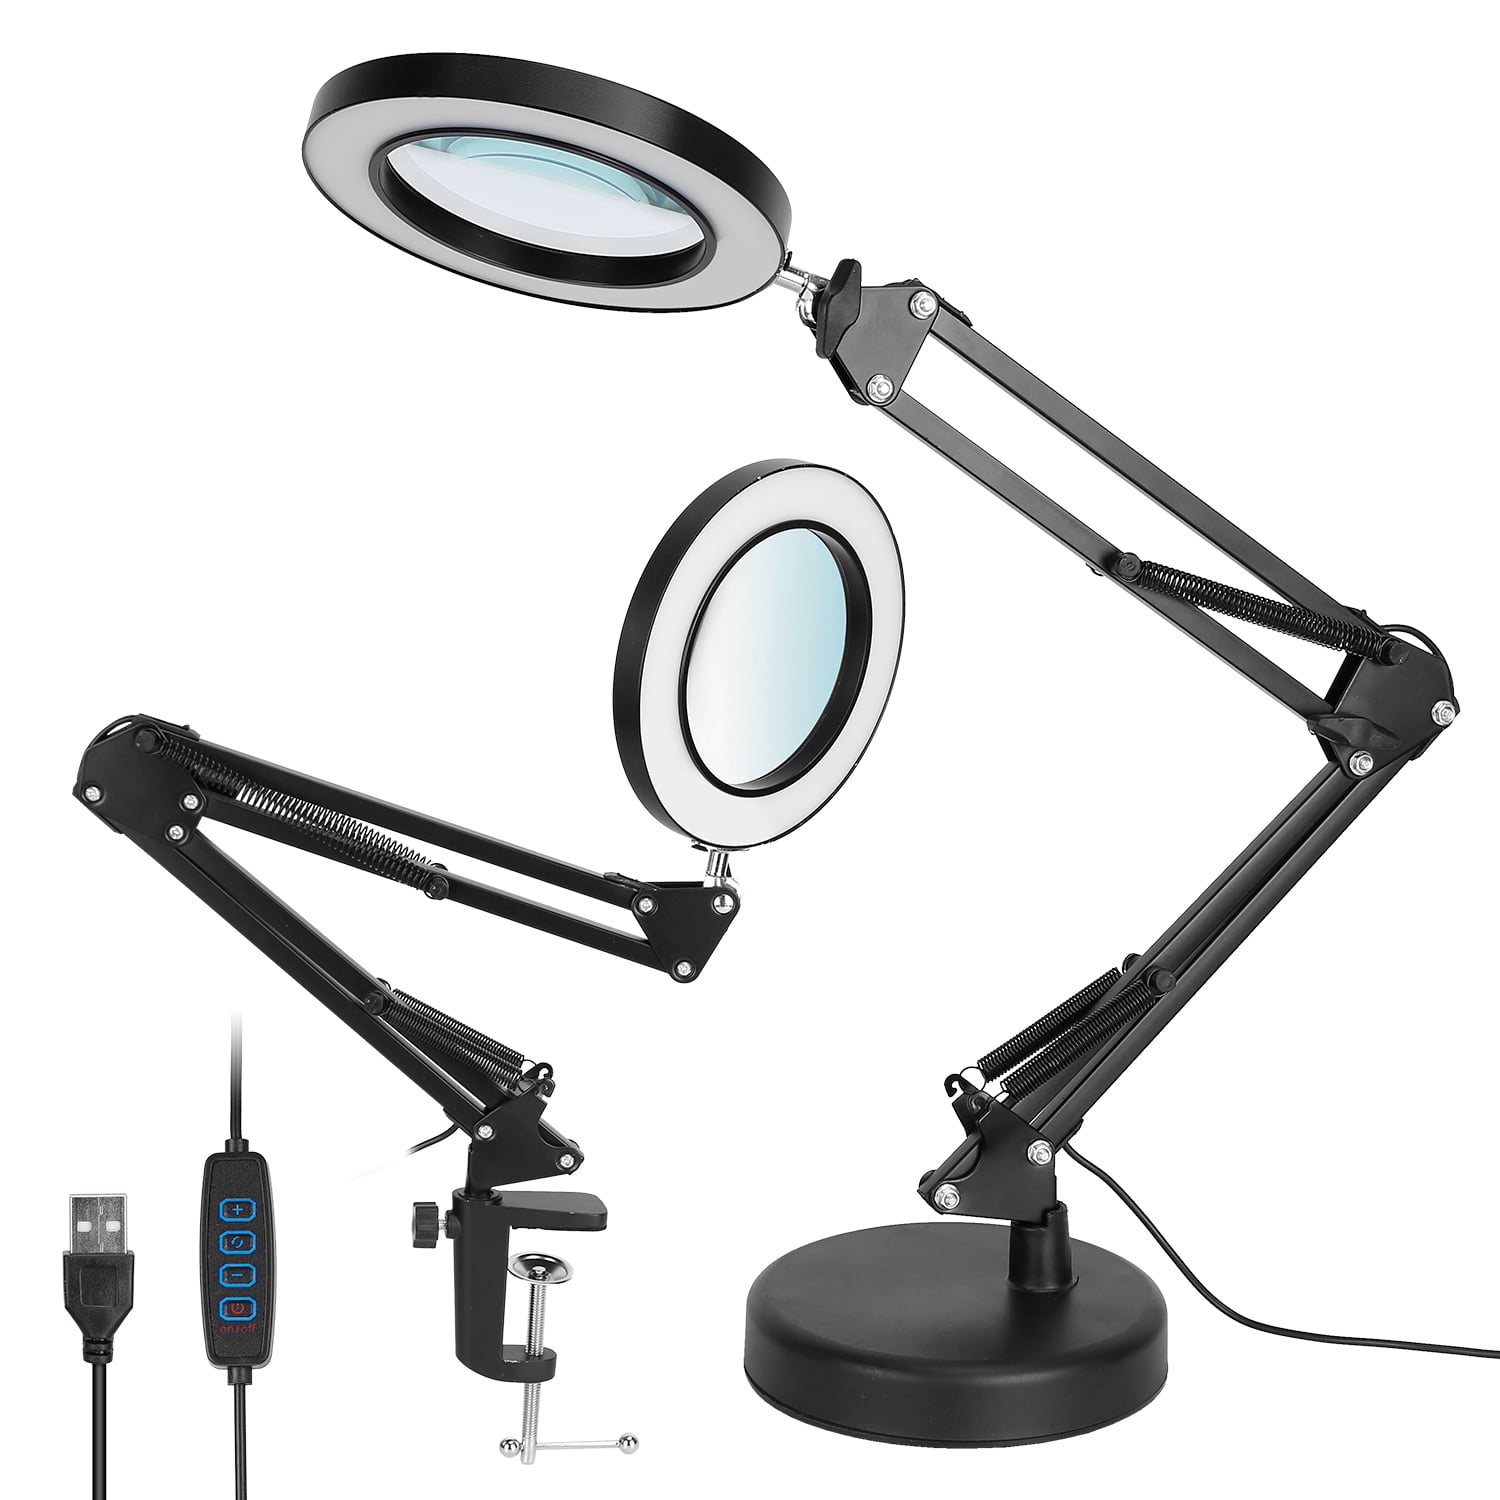 8x LED Adjustable Lamp Stand Magnifying Light For Skincare, Tattoo